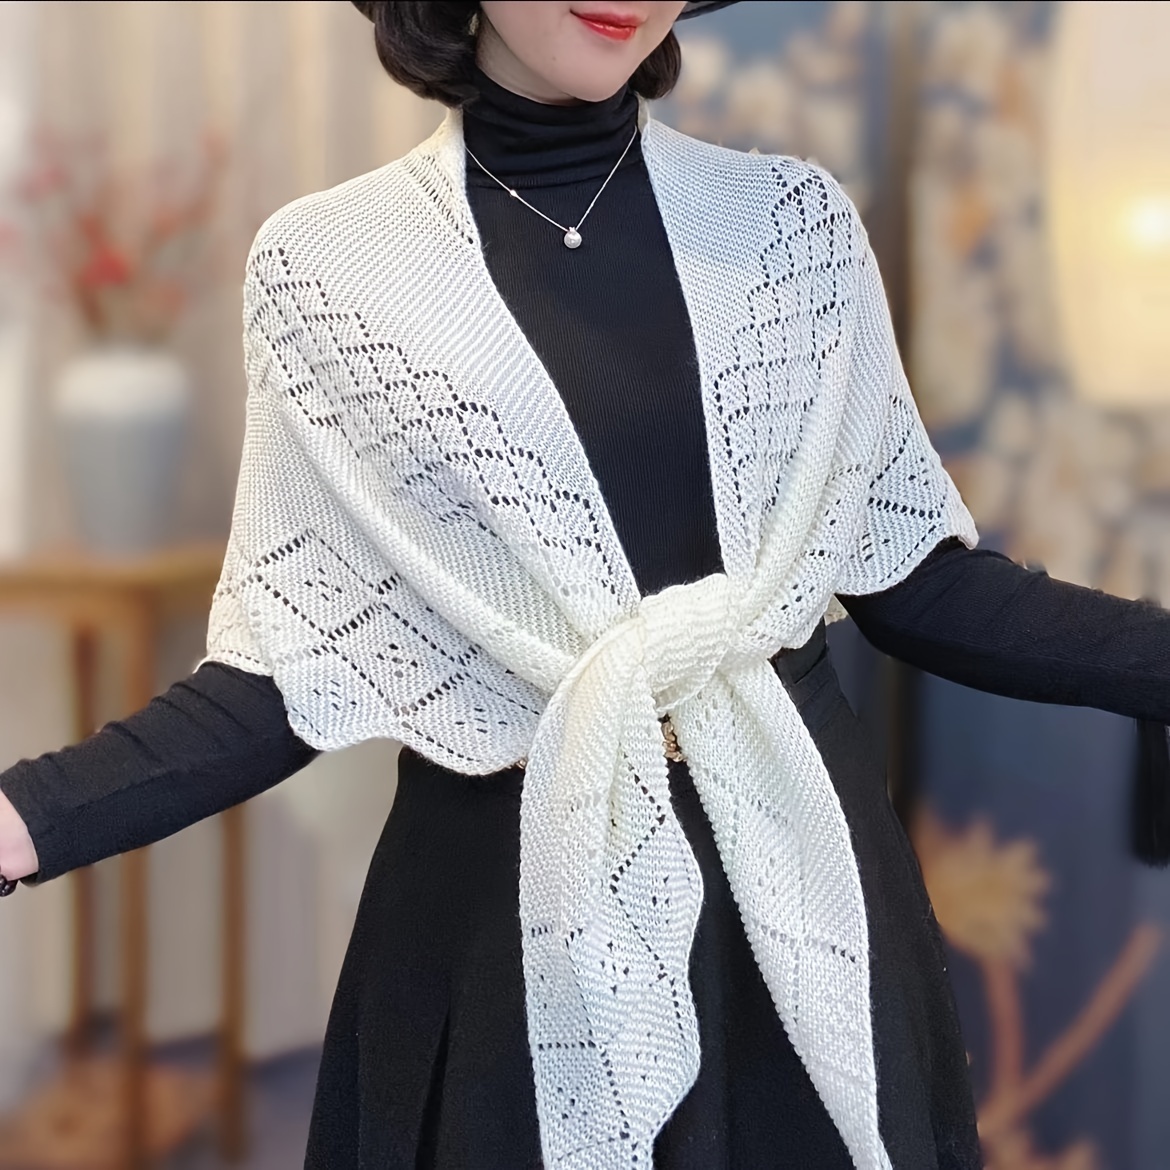 

Elegant Knit Hollow-out Triangle Shawl - Solid Color, Versatile & Warm For Casual Outings Elegant Shawl Knitted Cardigan For Women